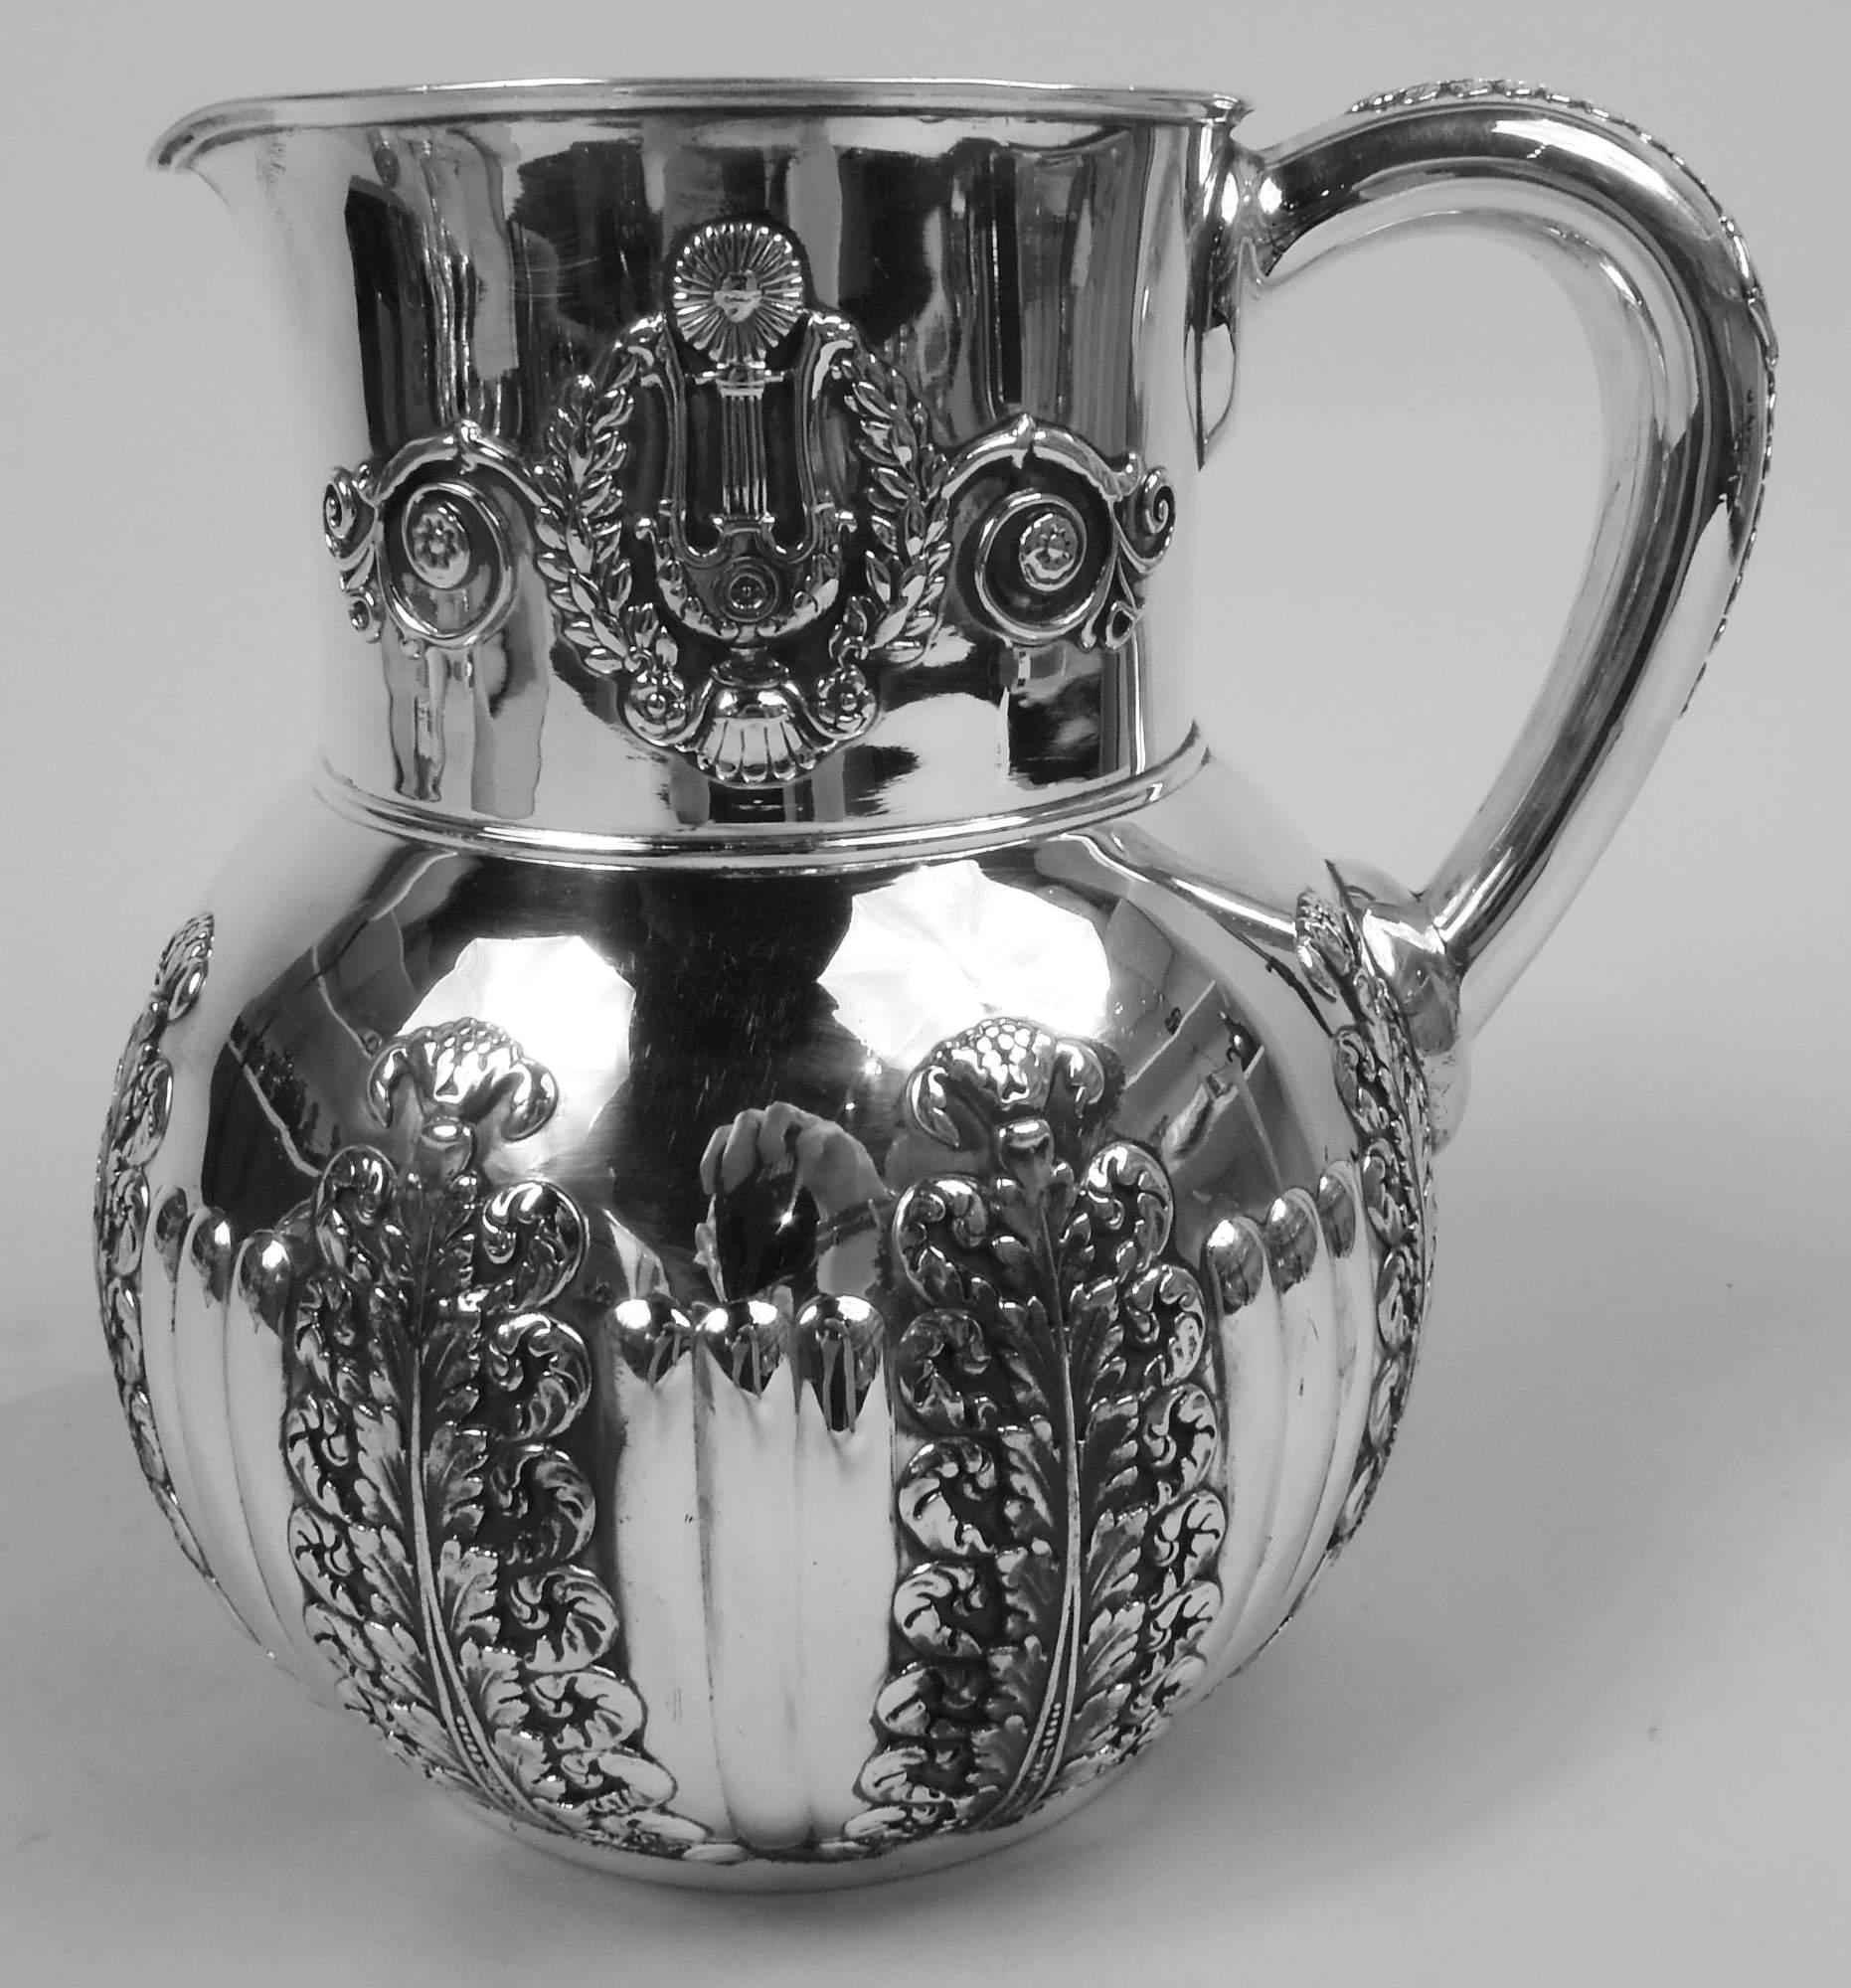 Victorian Classical sterling silver water pitcher. Made by Tiffany & Co. in New York, ca 1877. Globular bowl with drum-form neck, small lip spout, and c-scroll handle. Bowl has vertical ornament in form of applied acanthus leaves alternating with